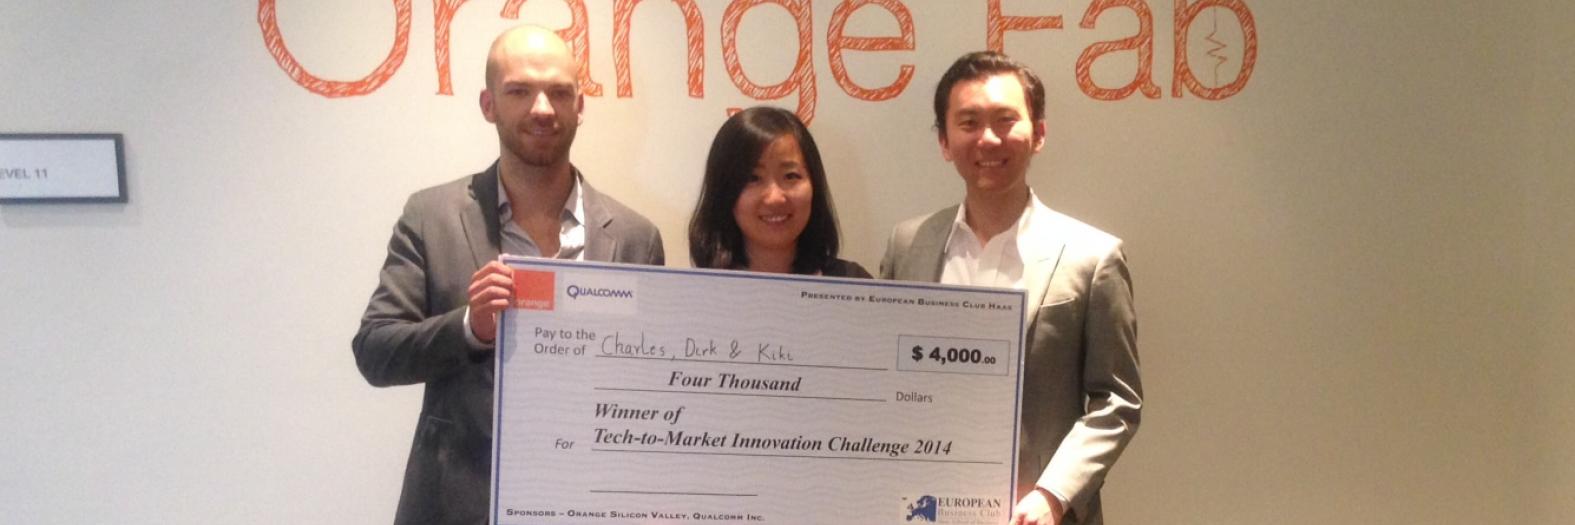 Dirk de Wit, Kiki Liu, and Charles Guo (left to right), winners of the Tech-to-Market Innovation Challenge